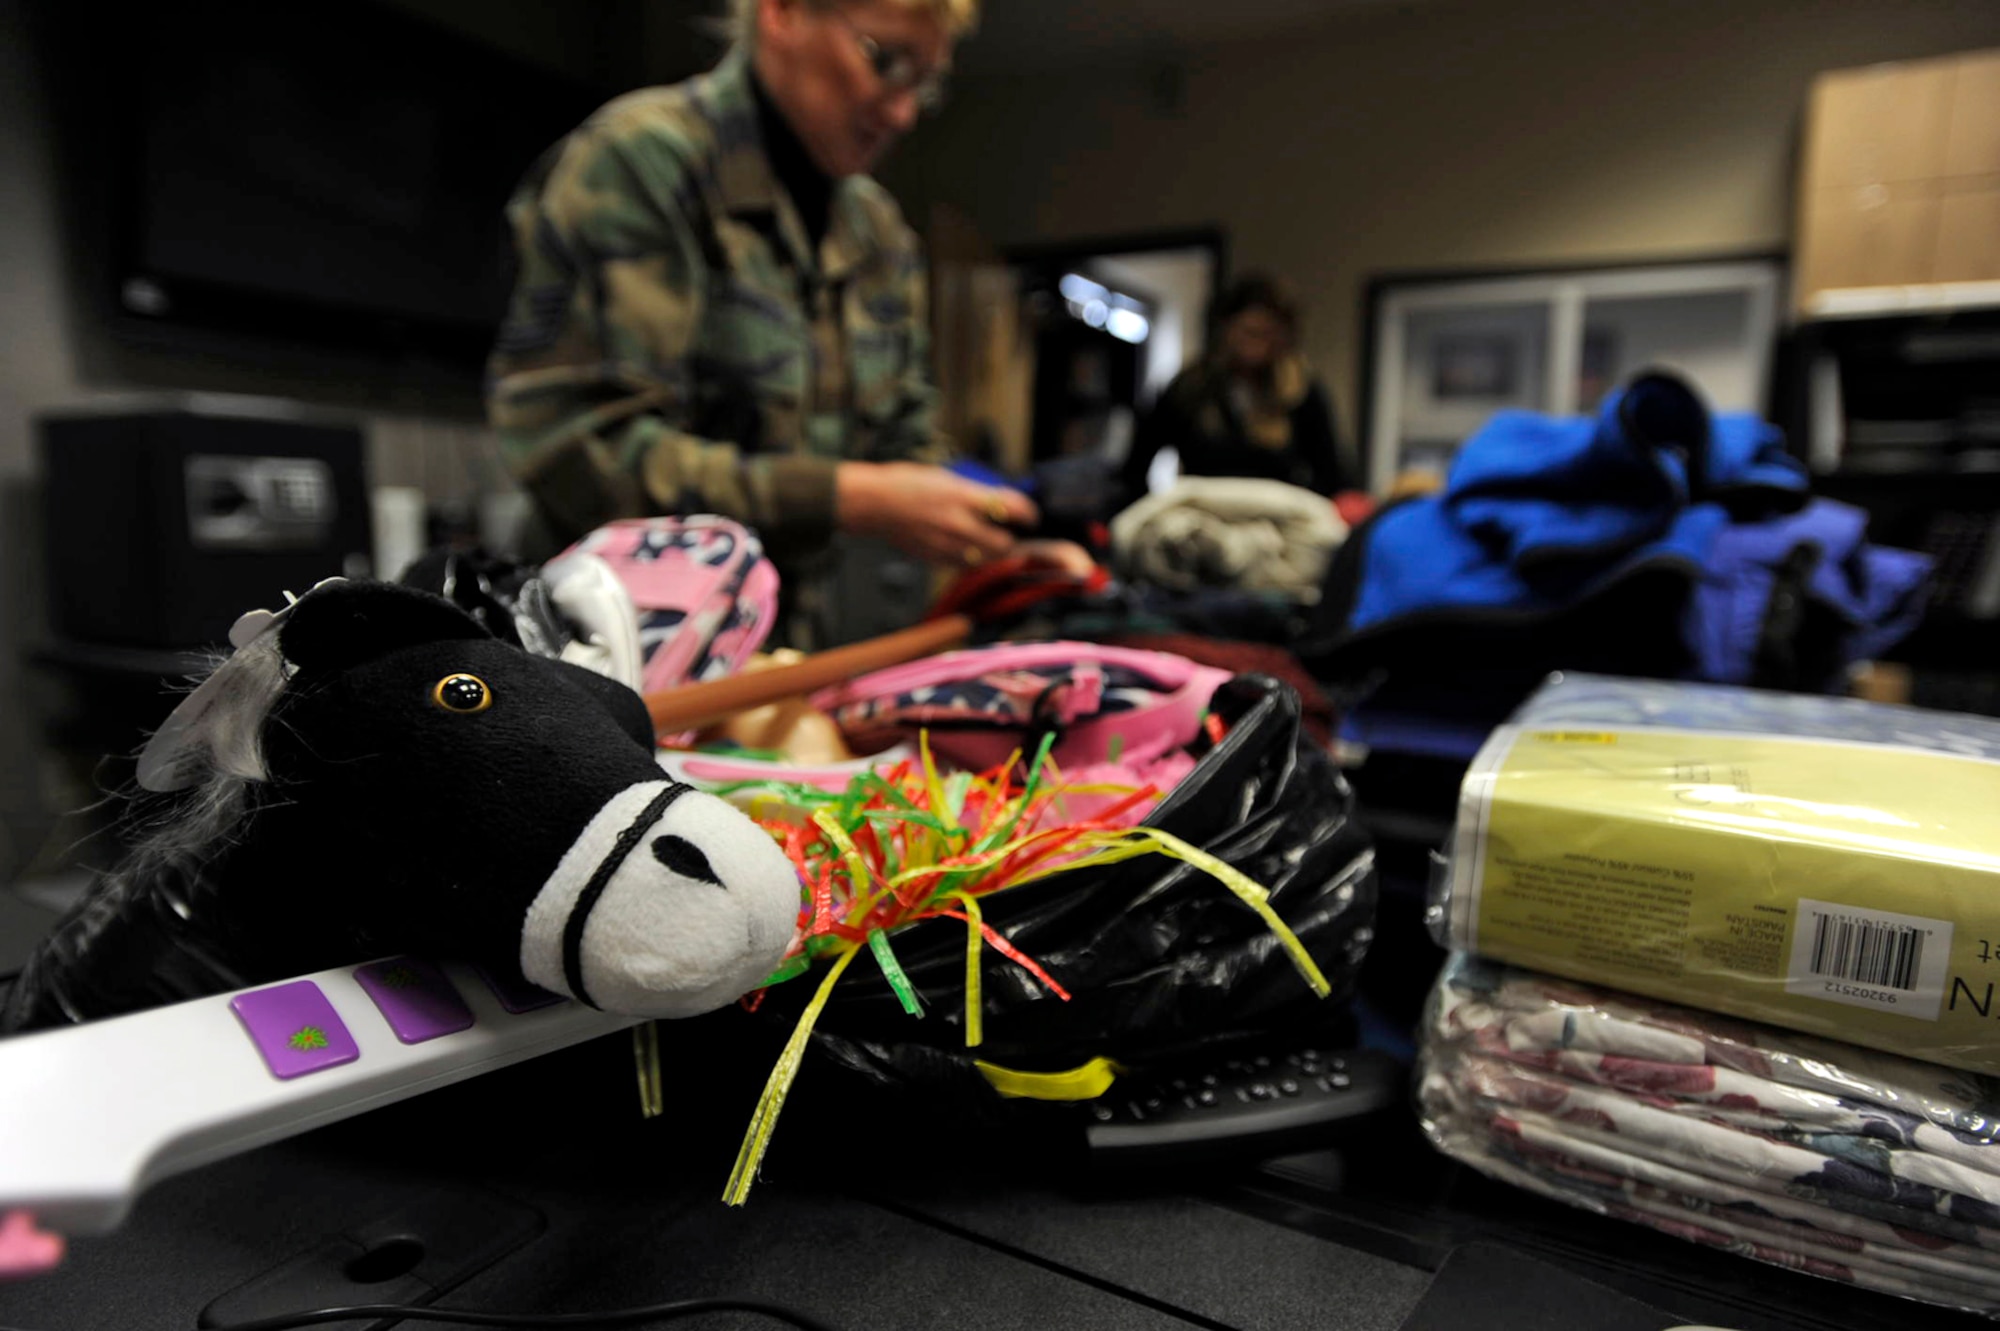 Toys were among the many items 931st Air Refueling Group members donated to a local shelter that helps domestic violence victims in the Wichita, Kan., community. The 931st Air Refueling Group is an Air Force Reserve unit at McConnell Air Force Base, Kan. (U.S. Air Force photo/Tech. Sgt. Jason Schaap)